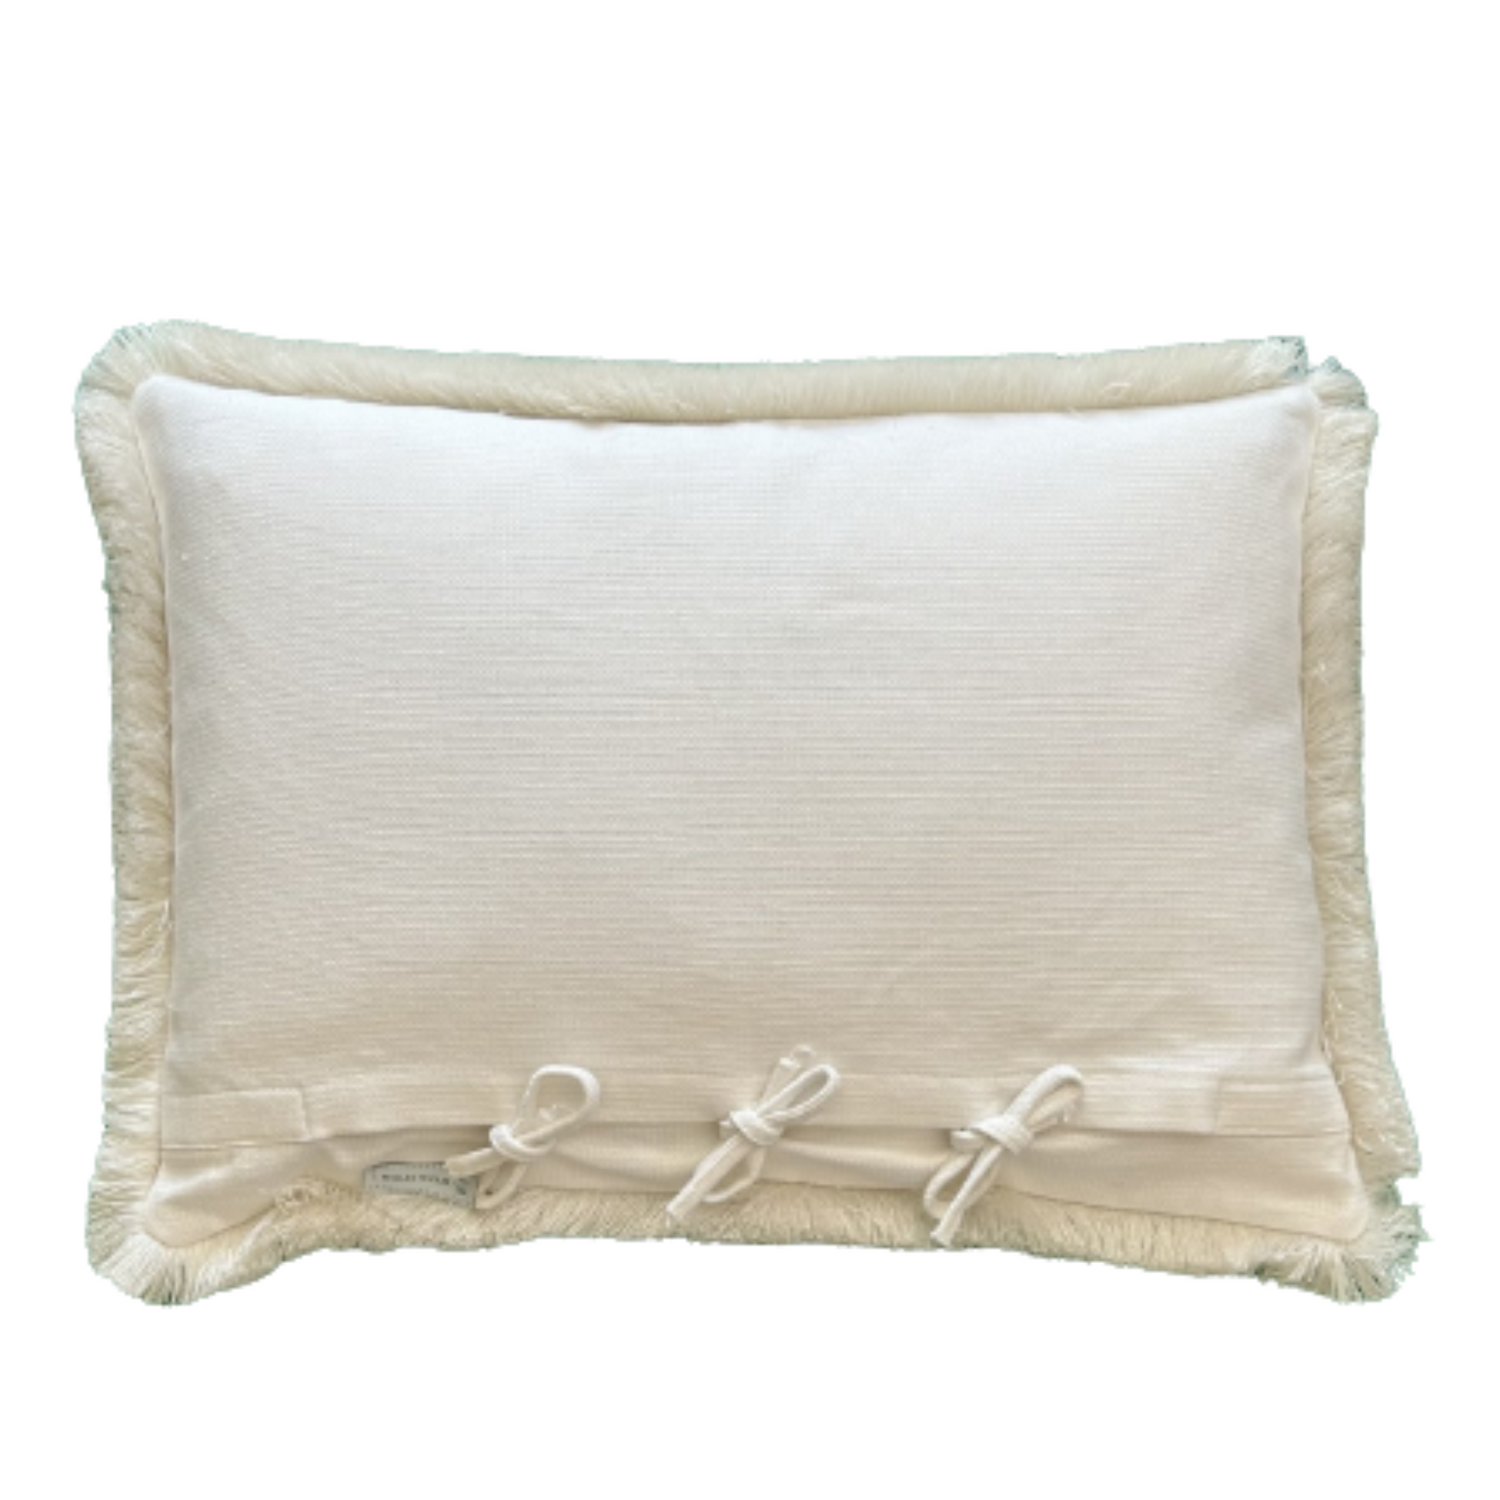 Mitford Blue and White 17 X 23 Rectangle Lumbar Designer Pillow with Down Feather Insert 